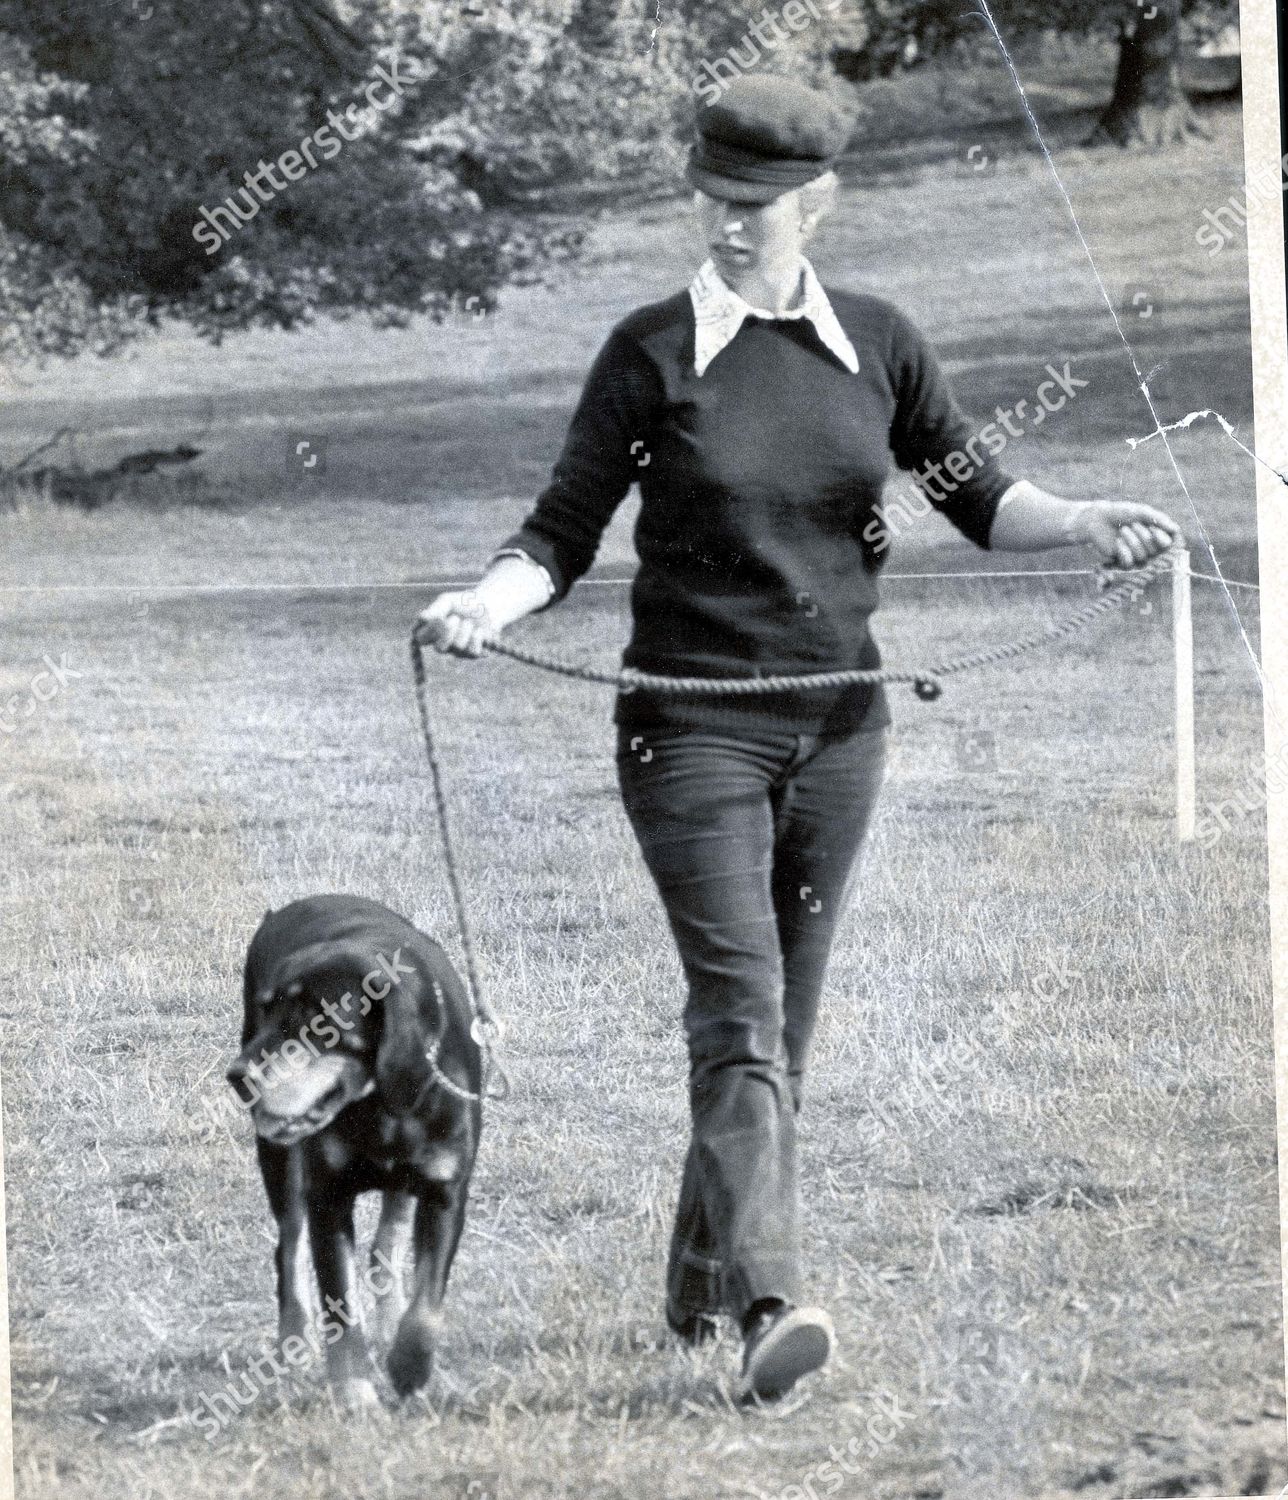 princess-anne-now-princess-royal-september-1975-princess-anne-with-her-dog-pleasure-at-burghley-royalty-shutterstock-editorial-895500a.jpg